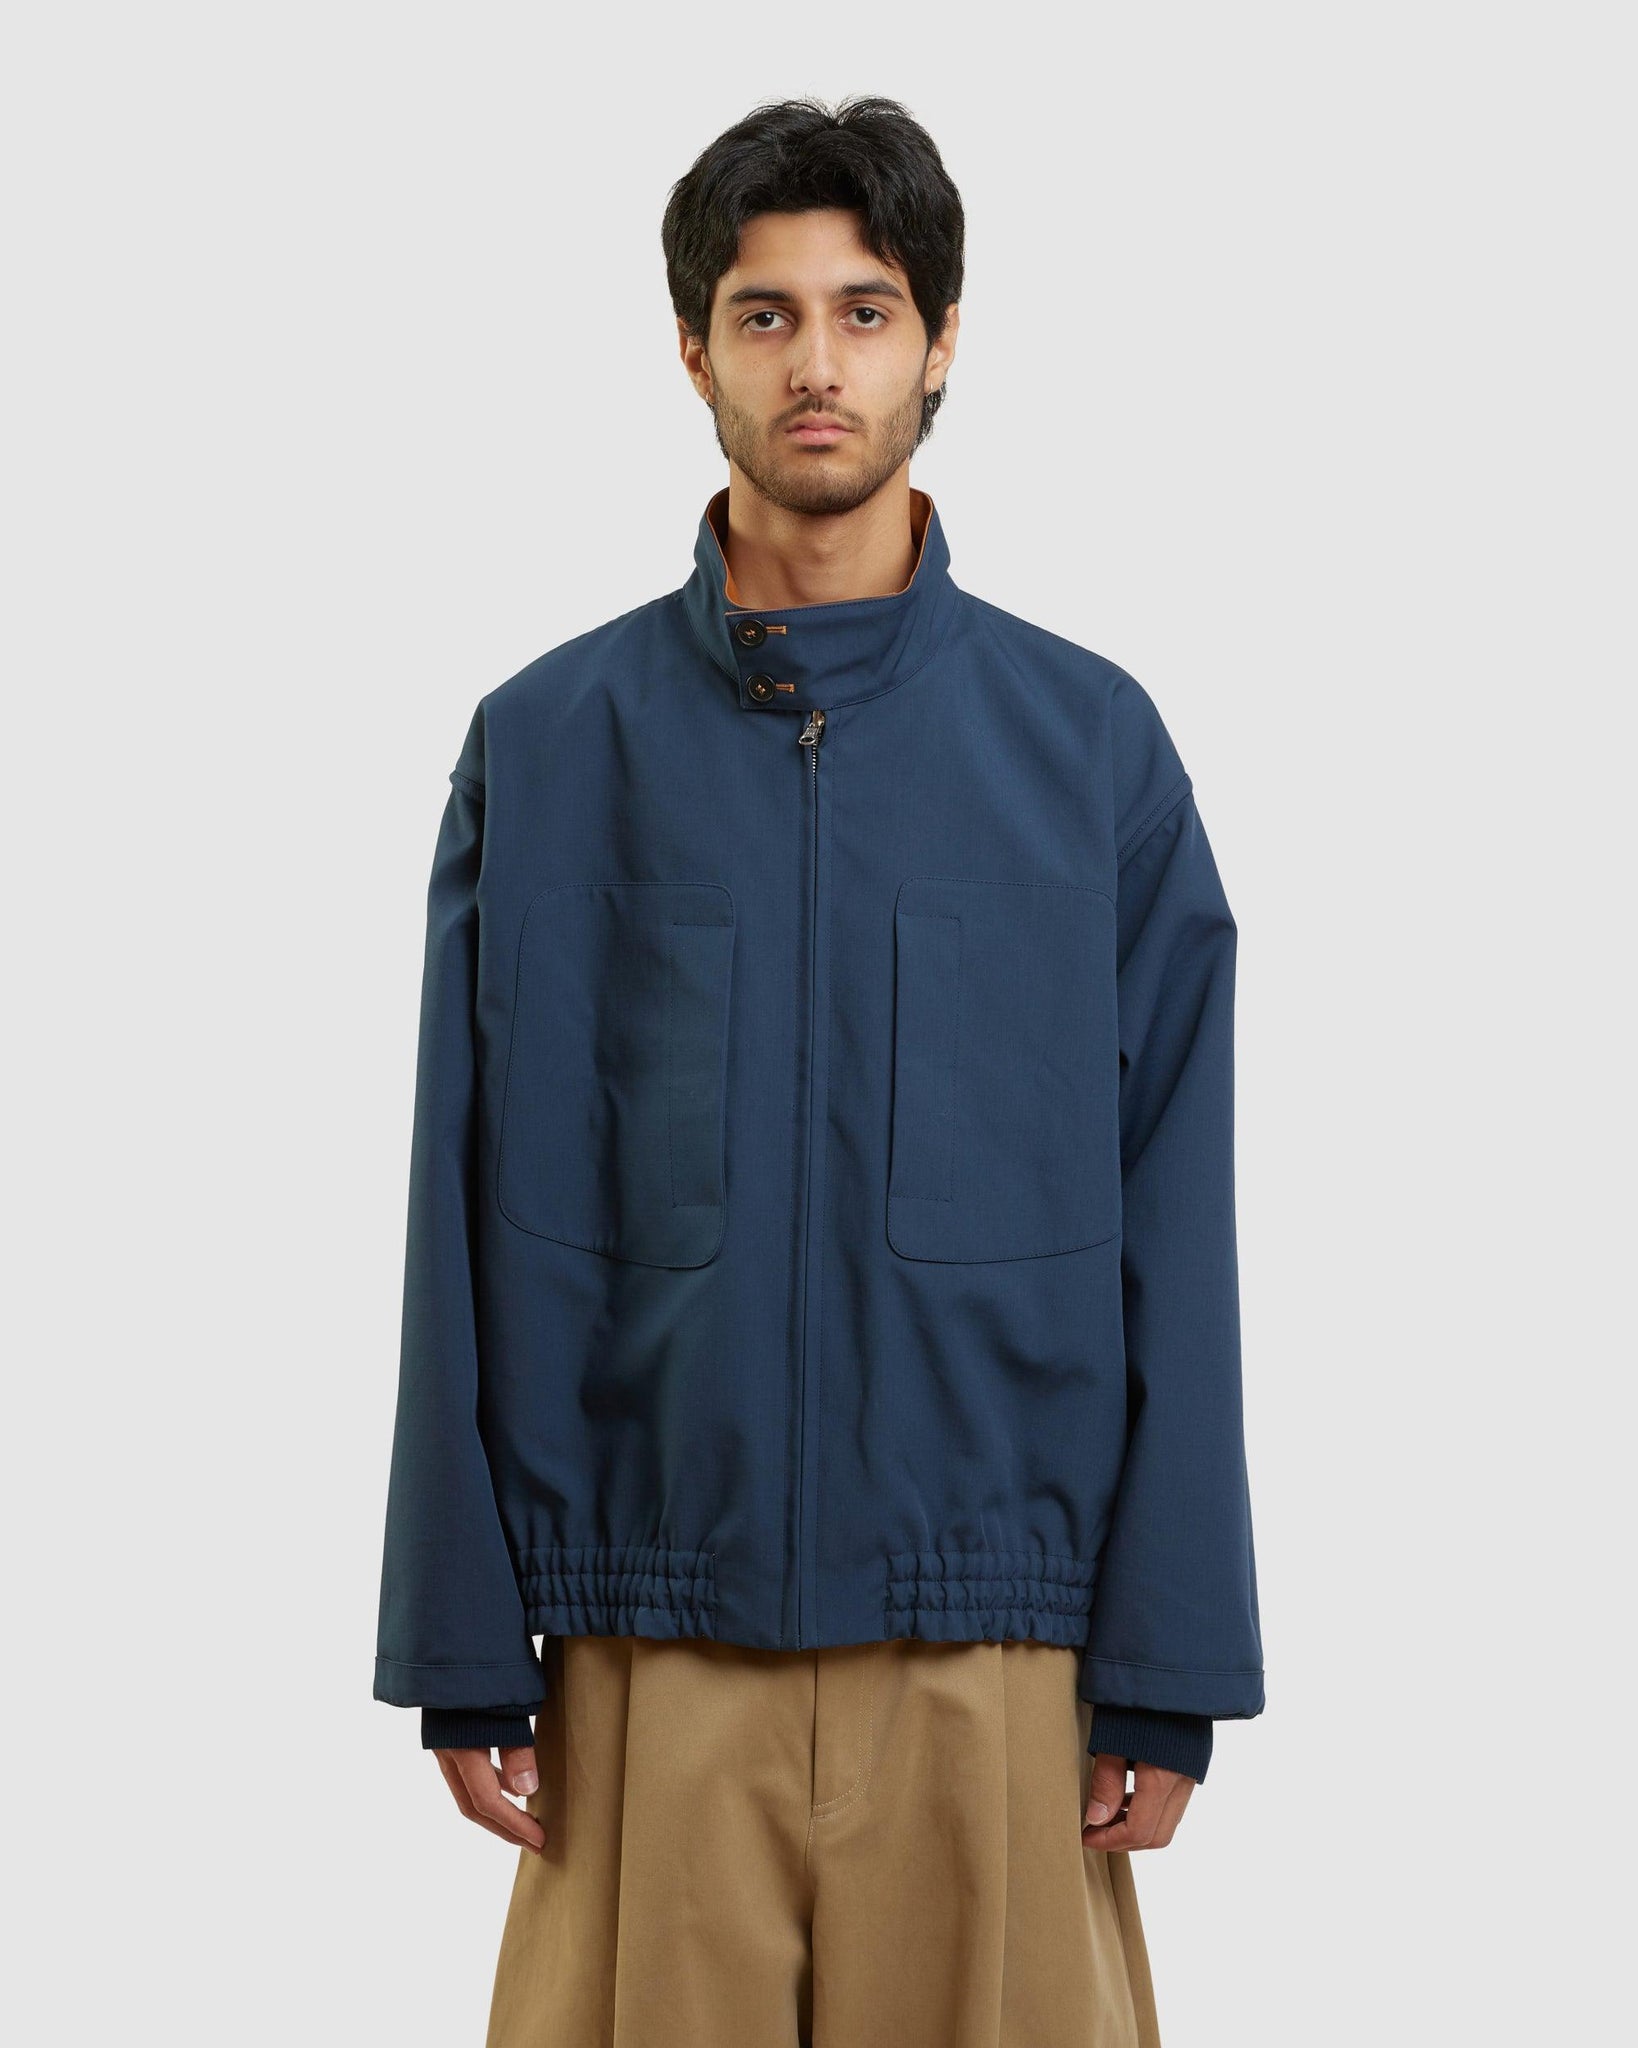 Unnar Reversible Jacket - {{ collection.title }} - Chinatown Country Club 